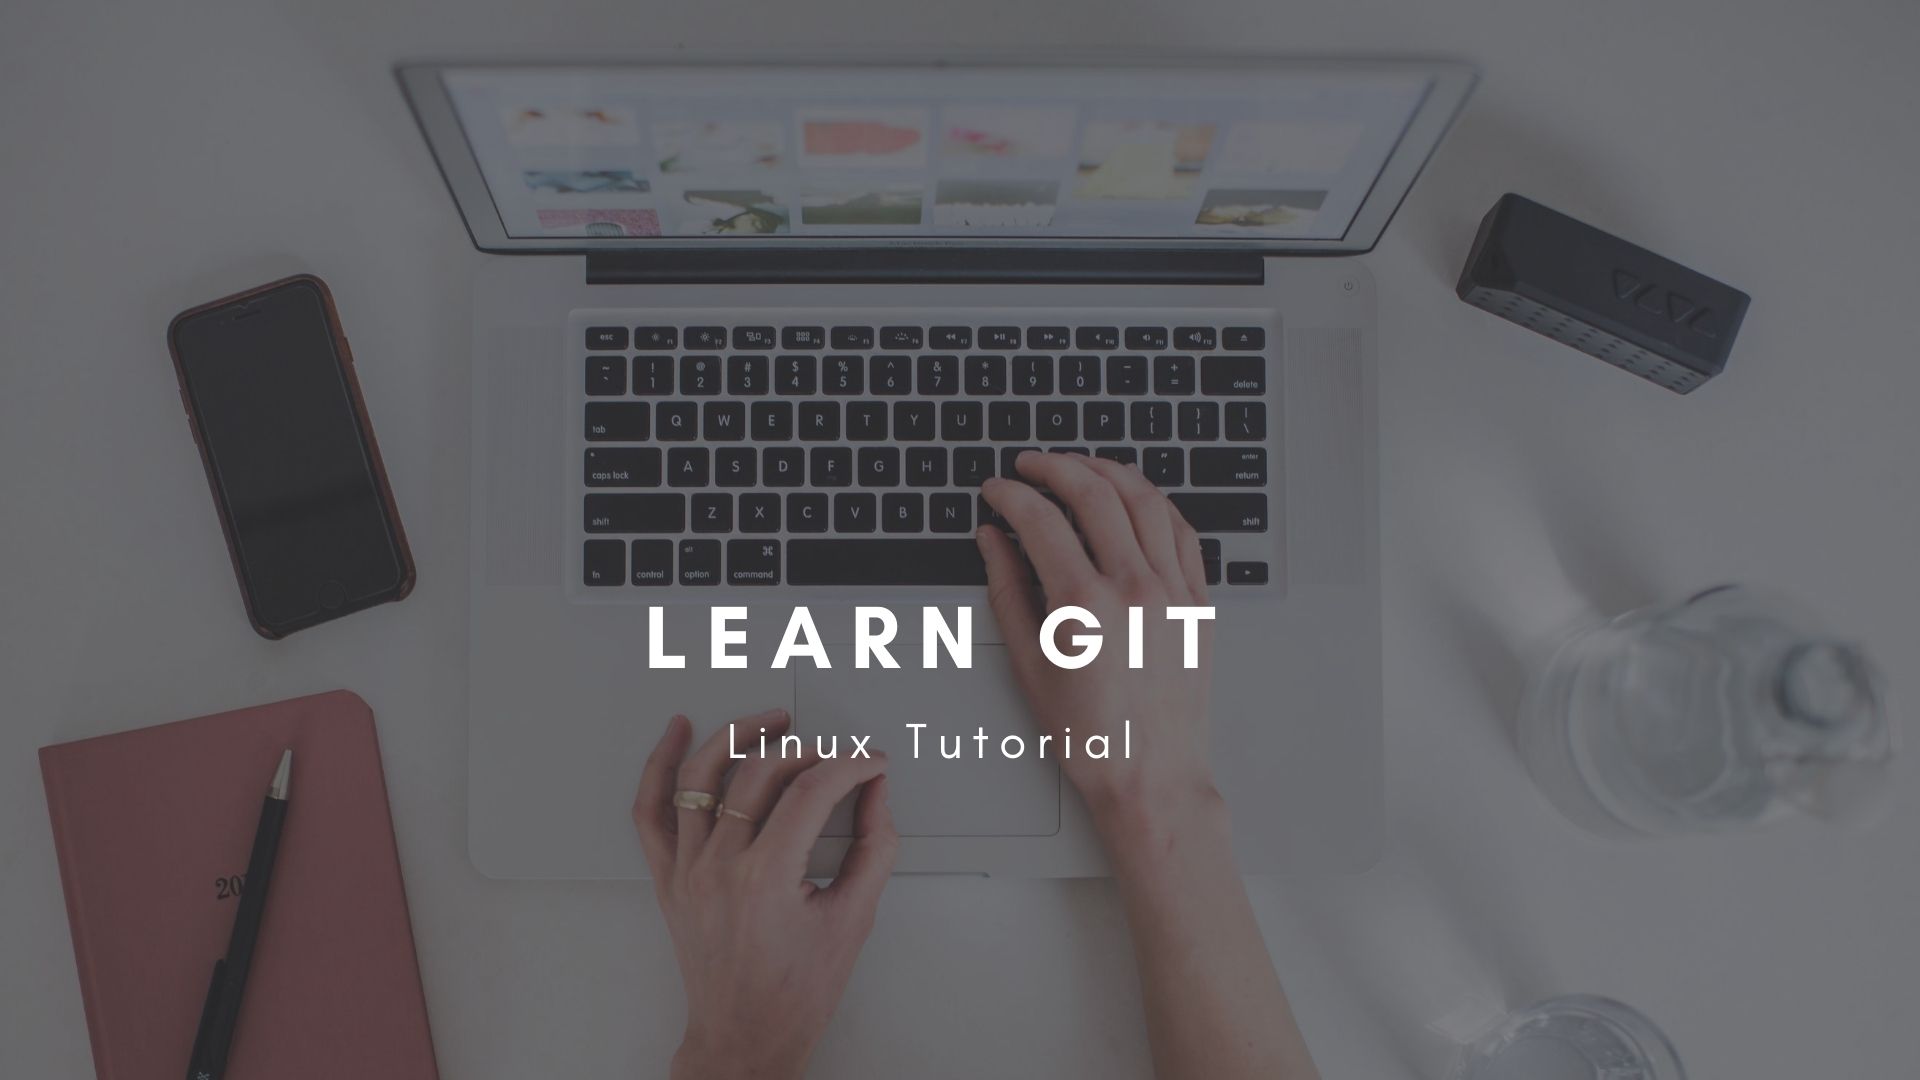 learn git on linux operating system-creationcodes workout examples